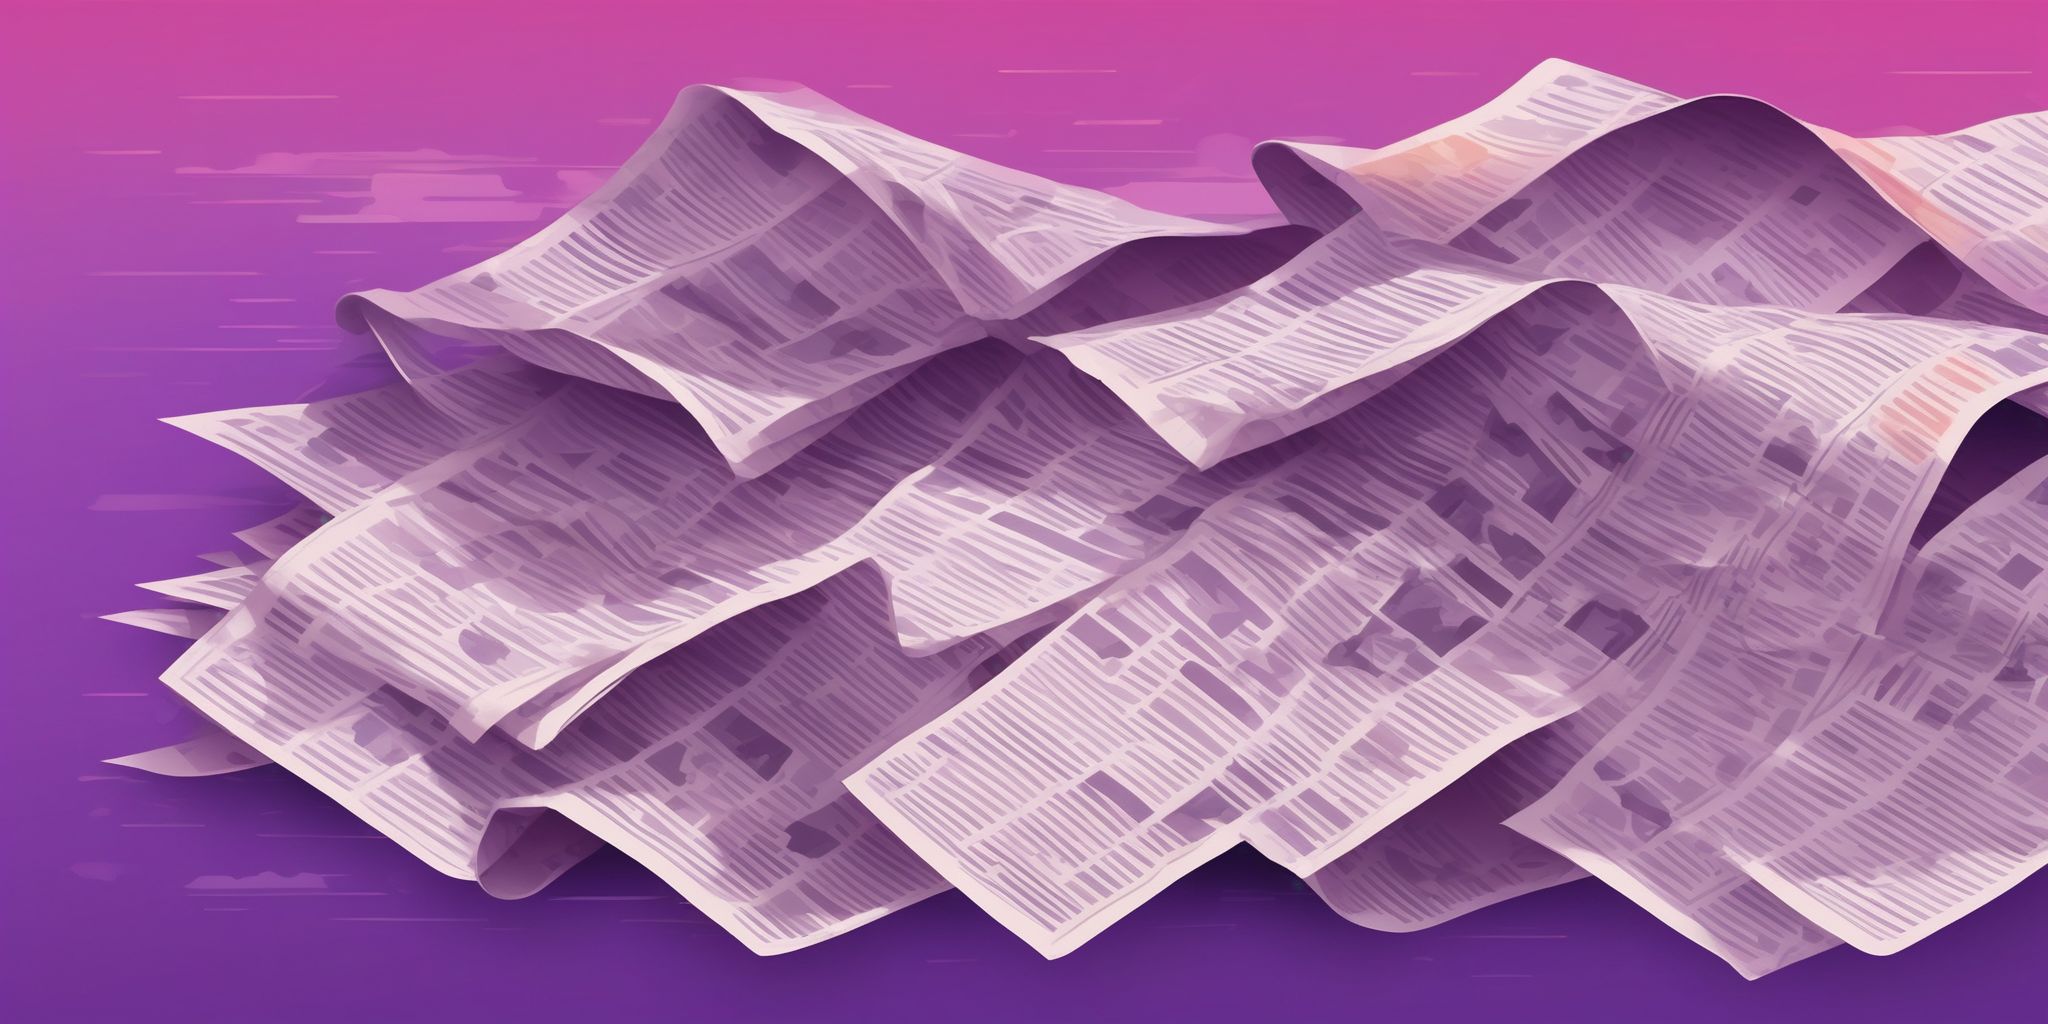 Newspaper in flat illustration style, colorful purple gradient colors